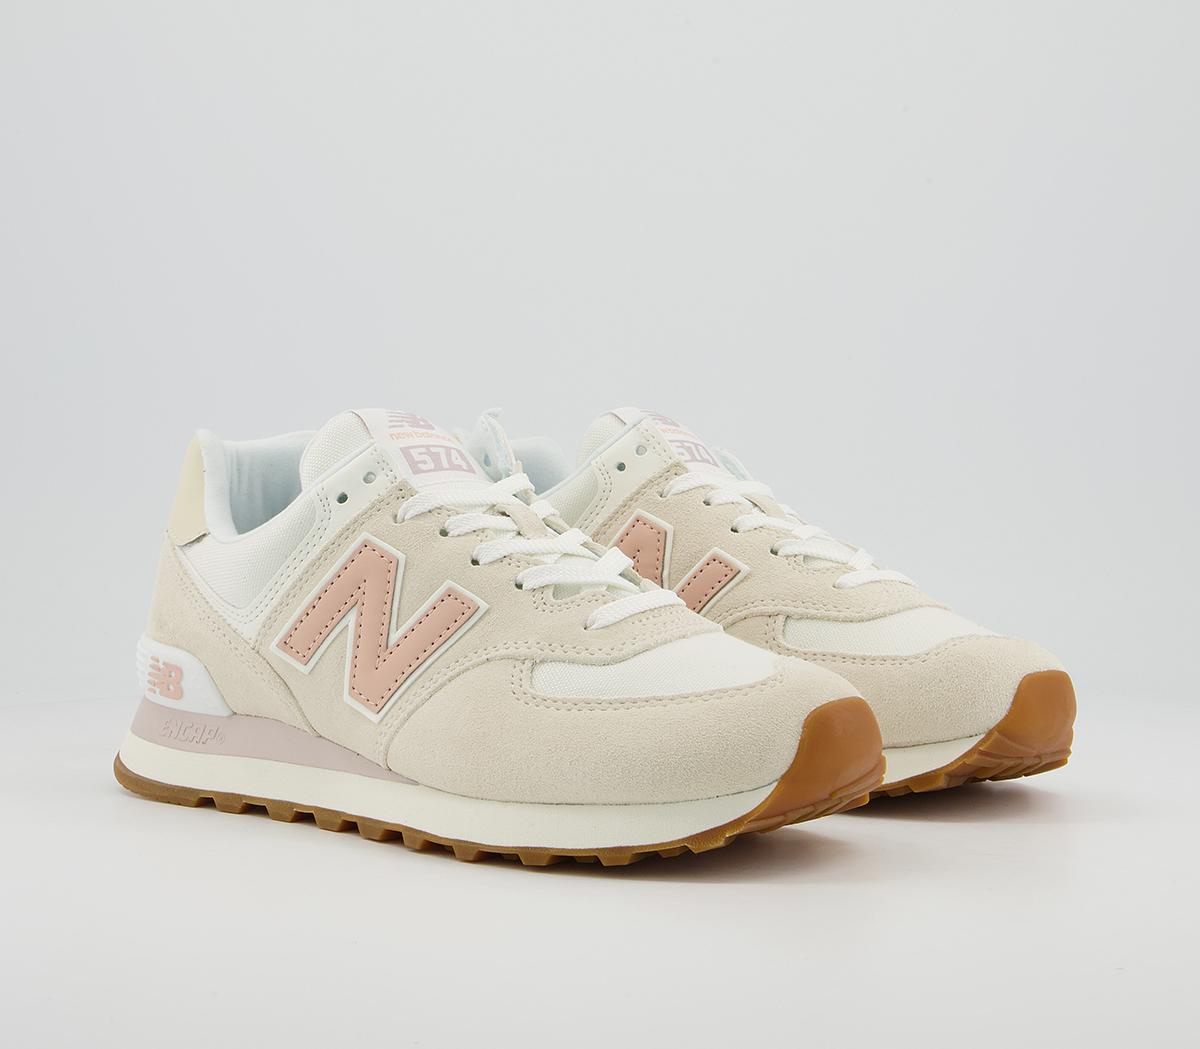 New Balance 574 Trainers White - Hers trainers